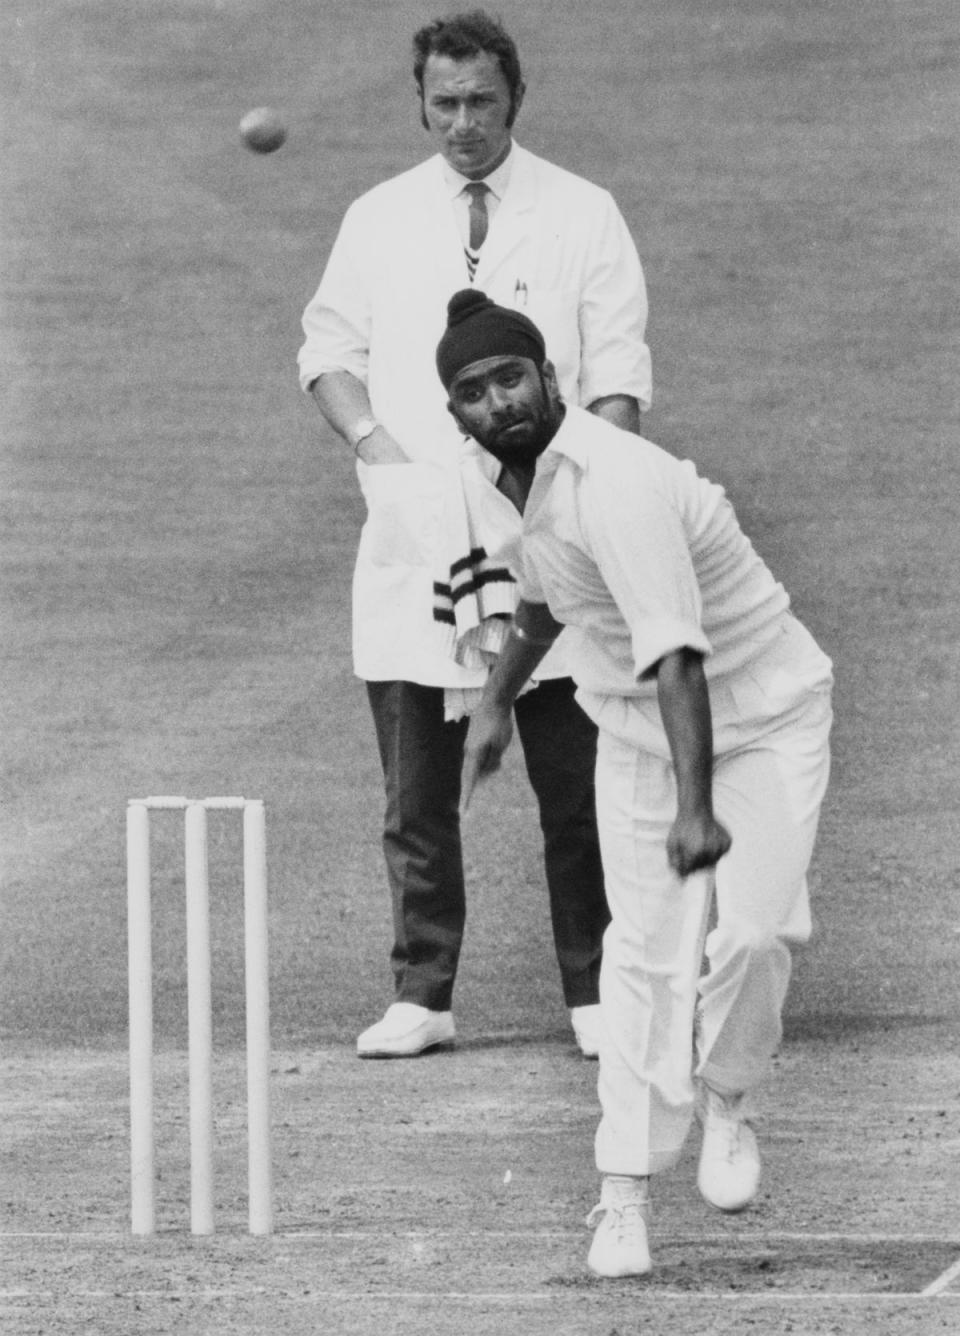 Bishan Singh Bedi in action on 2 August 1971 (Dennis Oulds/Central Press/Hulton Archive/Getty Images)